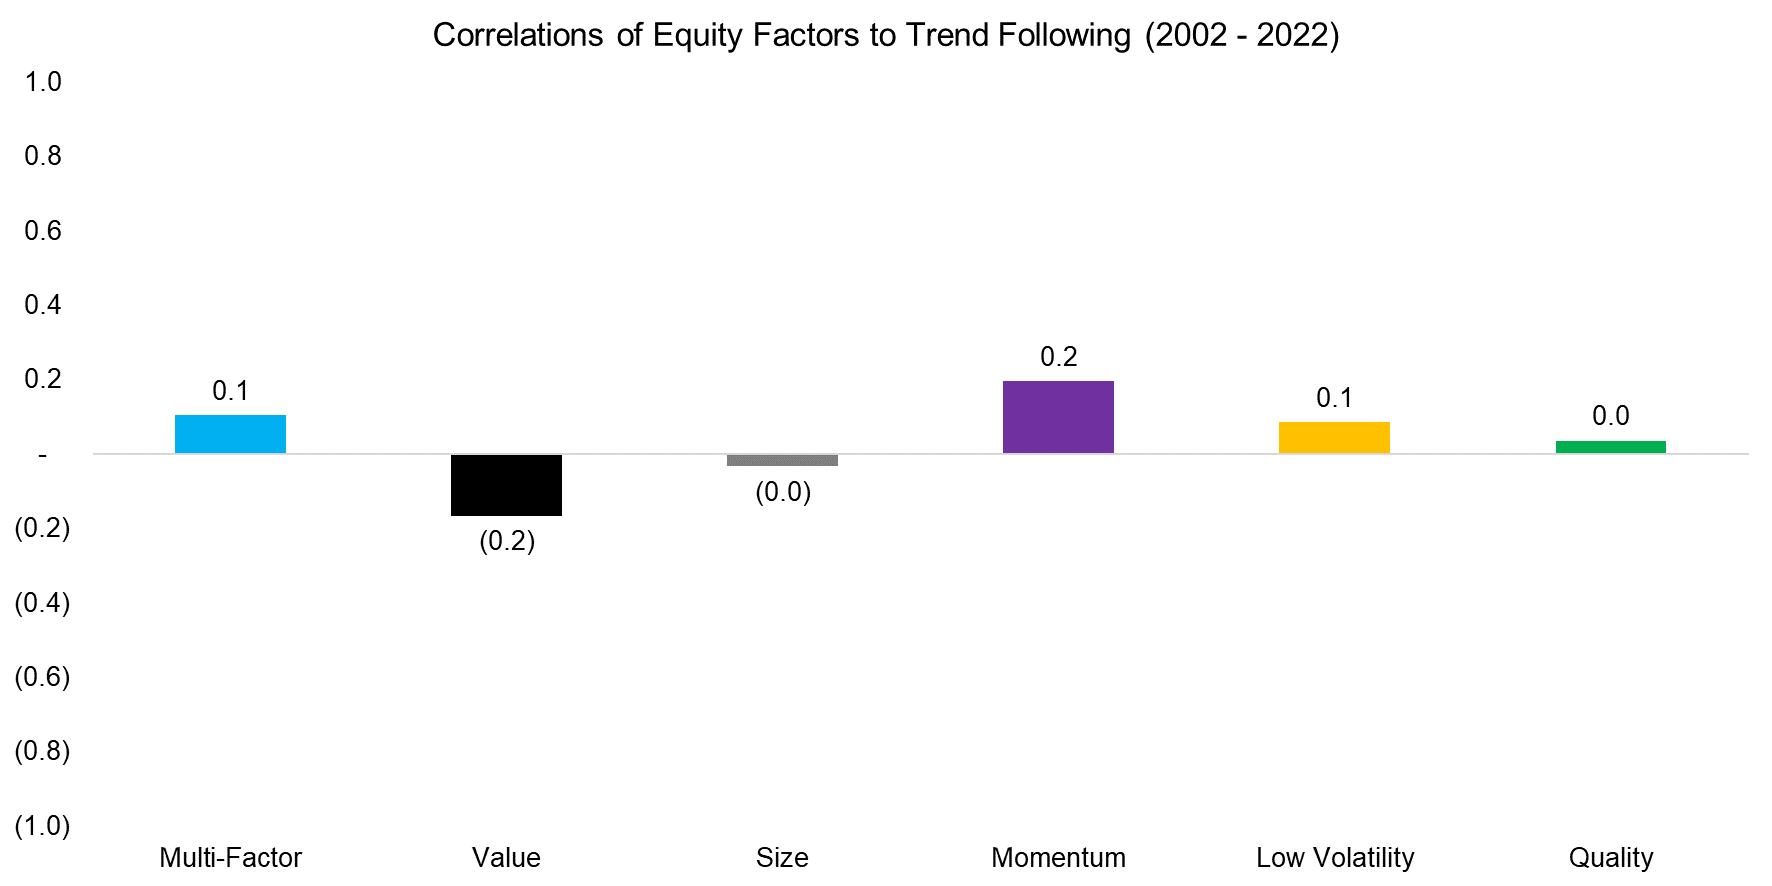 Correlations of Equity Factors to Trend Following (2002 - 2022)